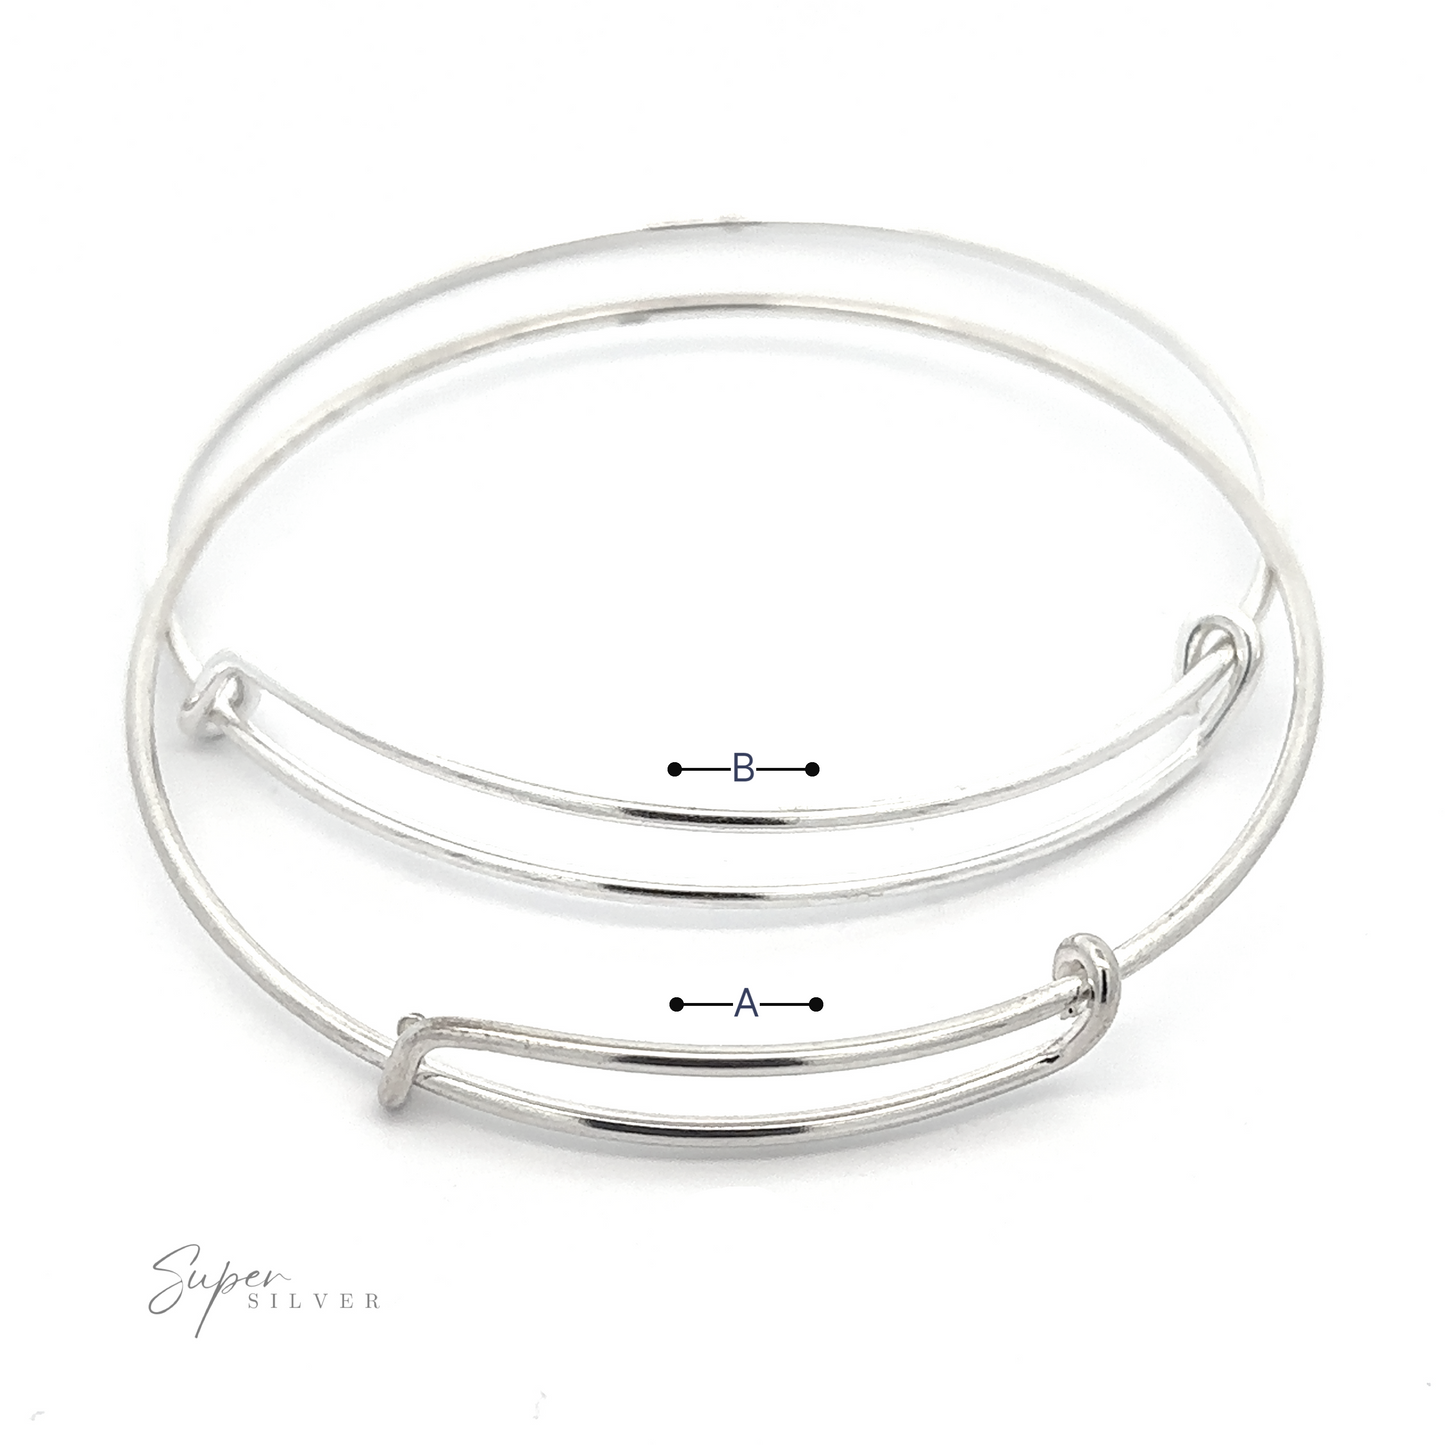 
                  
                    Two sterling silver bangles with minimalistic design, featuring a plain finish and slight curve. Text "Simple Adjustable Bangle Bracelet" is in the lower left corner. Black arrows labeled A and B indicate different measurements for this adjustable bracelet.
                  
                